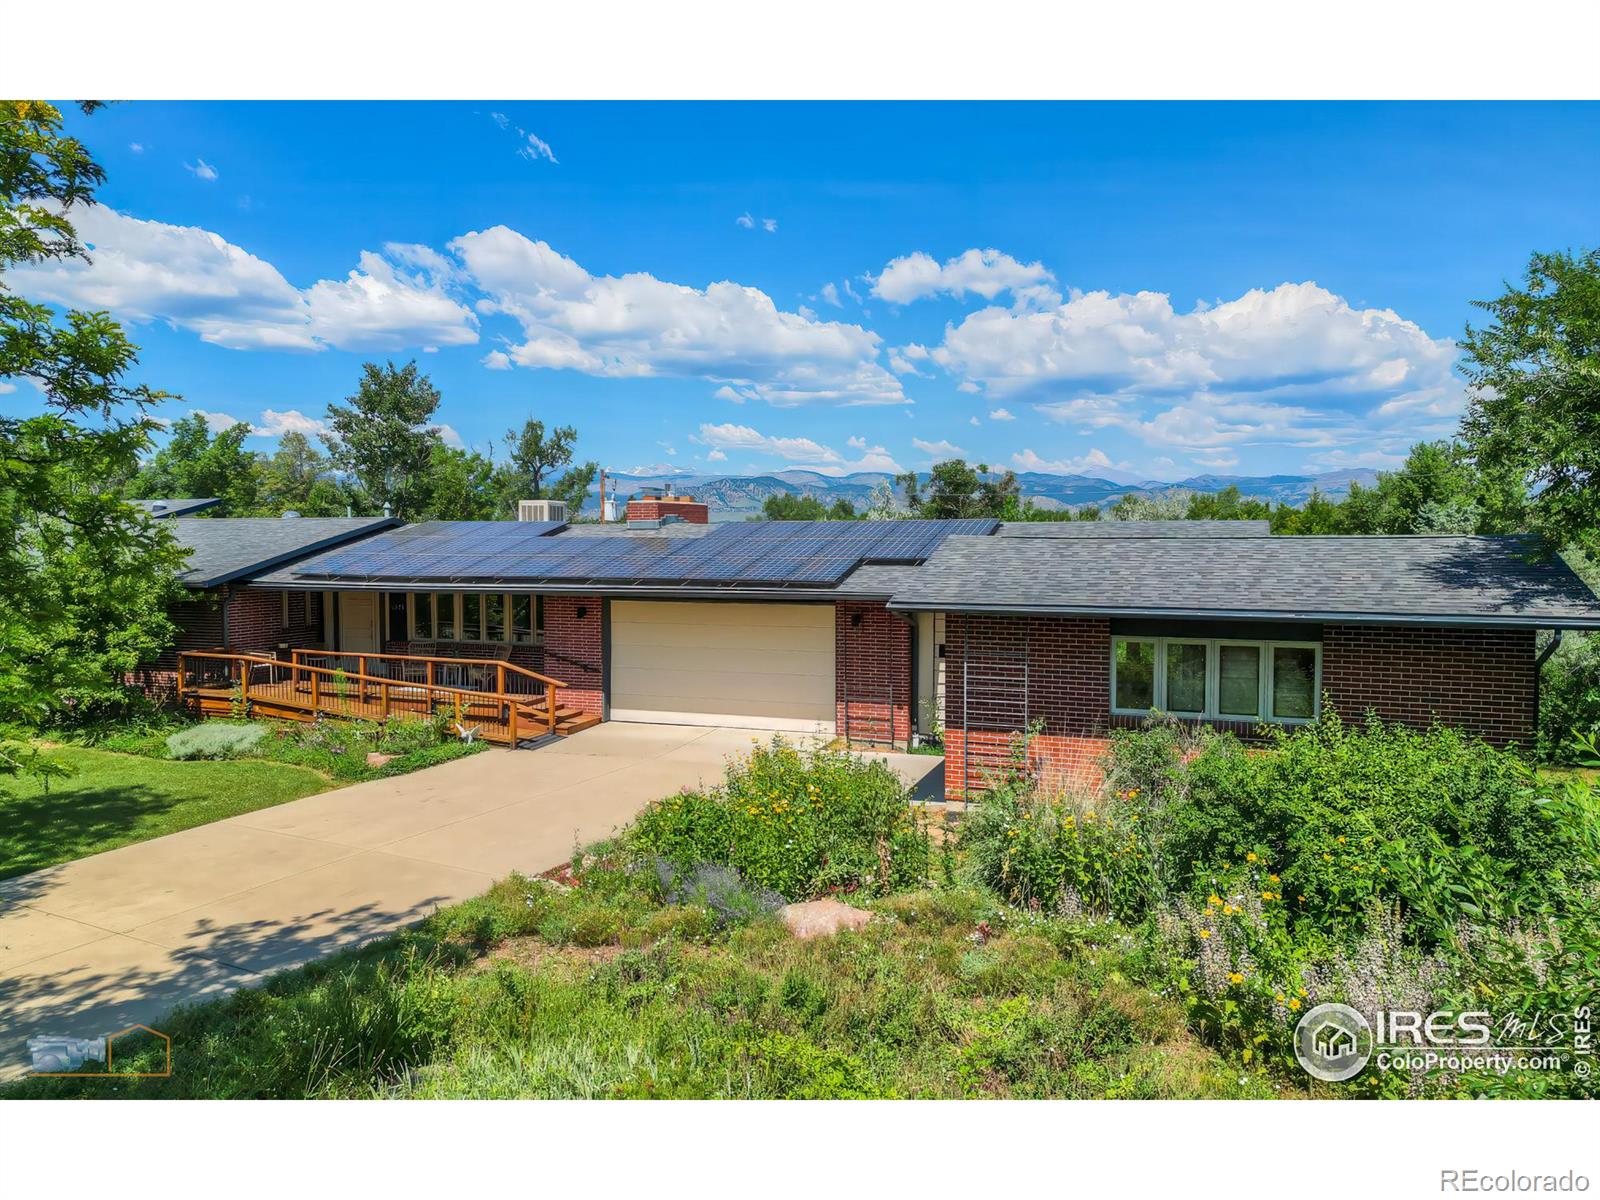 6423  Clearview Road, boulder MLS: 123456789992925 Beds: 6 Baths: 3 Price: $1,495,000